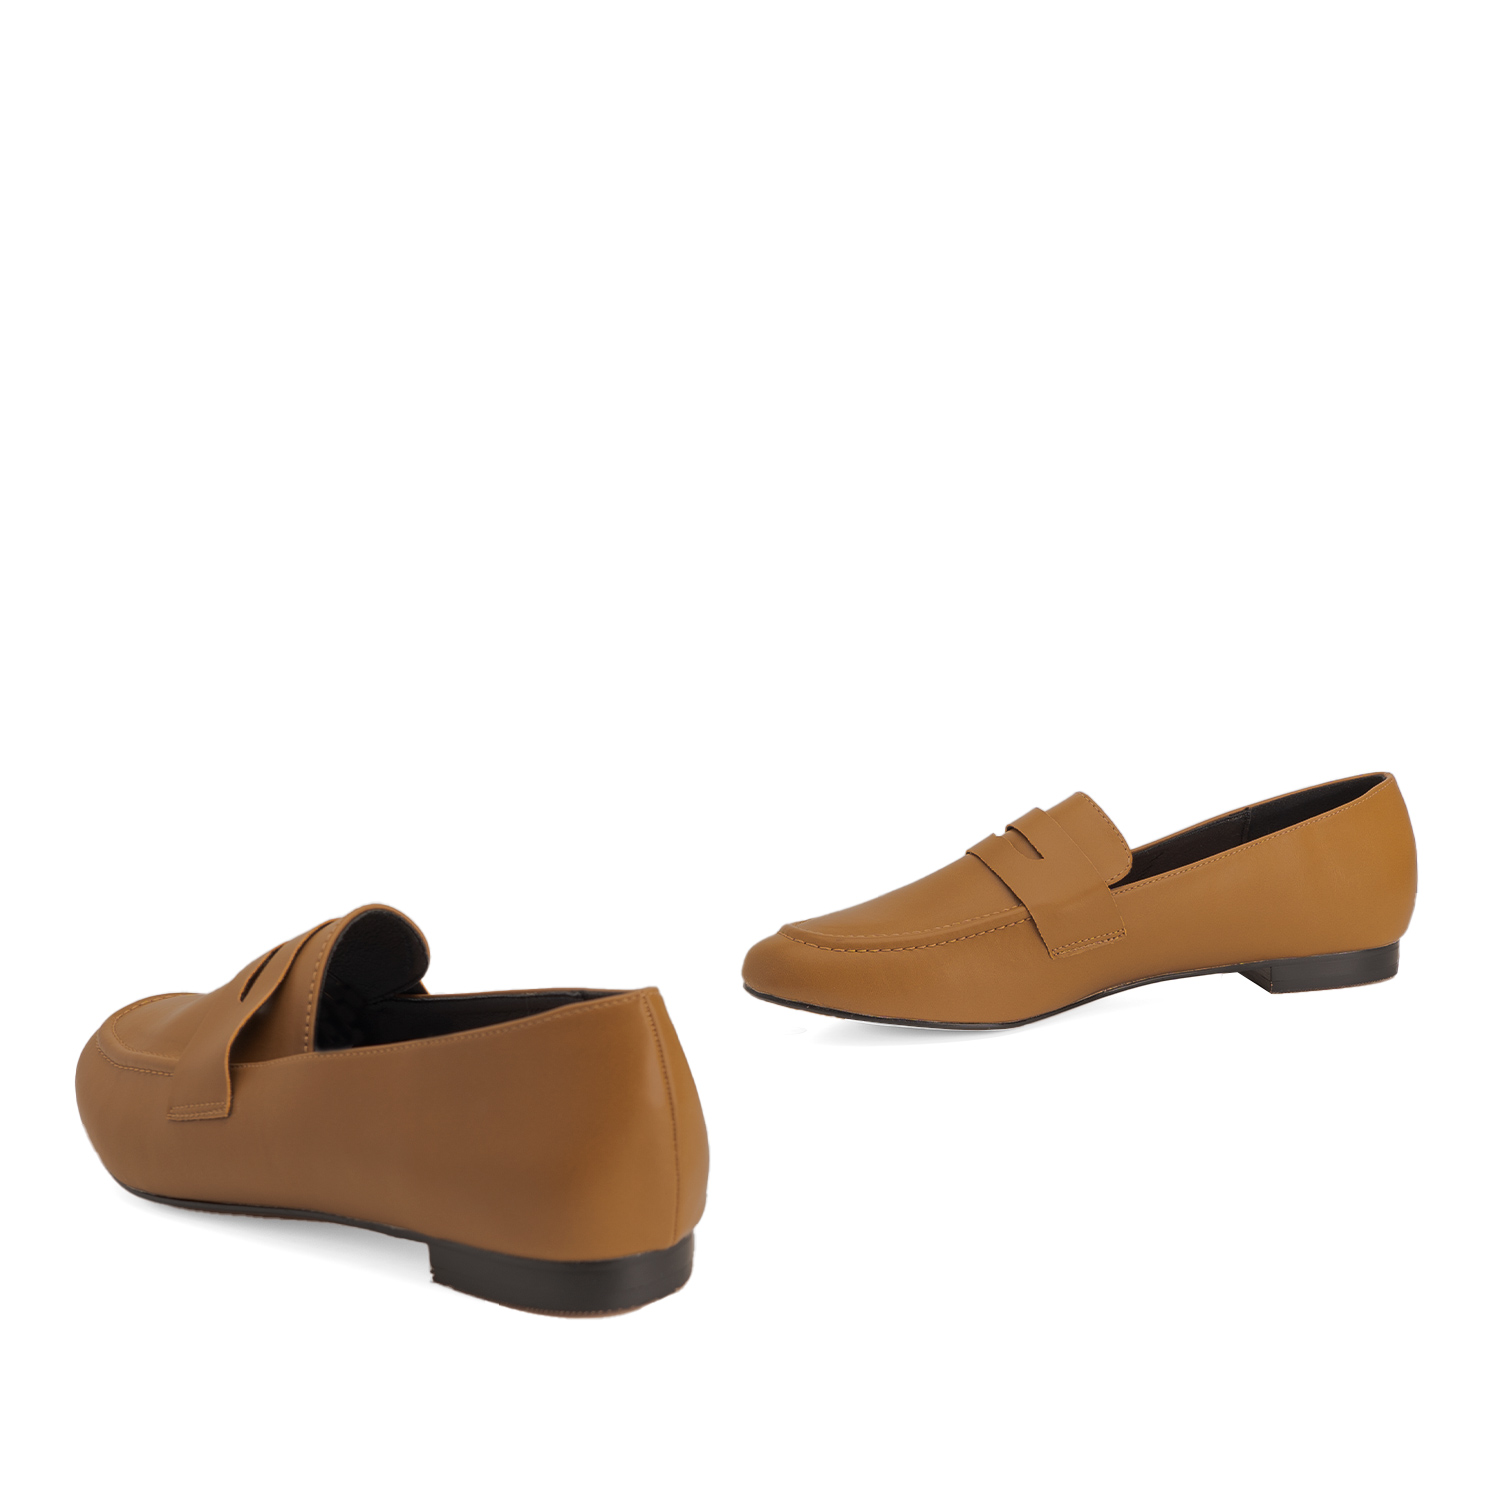 Penny loafer in camel colored faux leather 